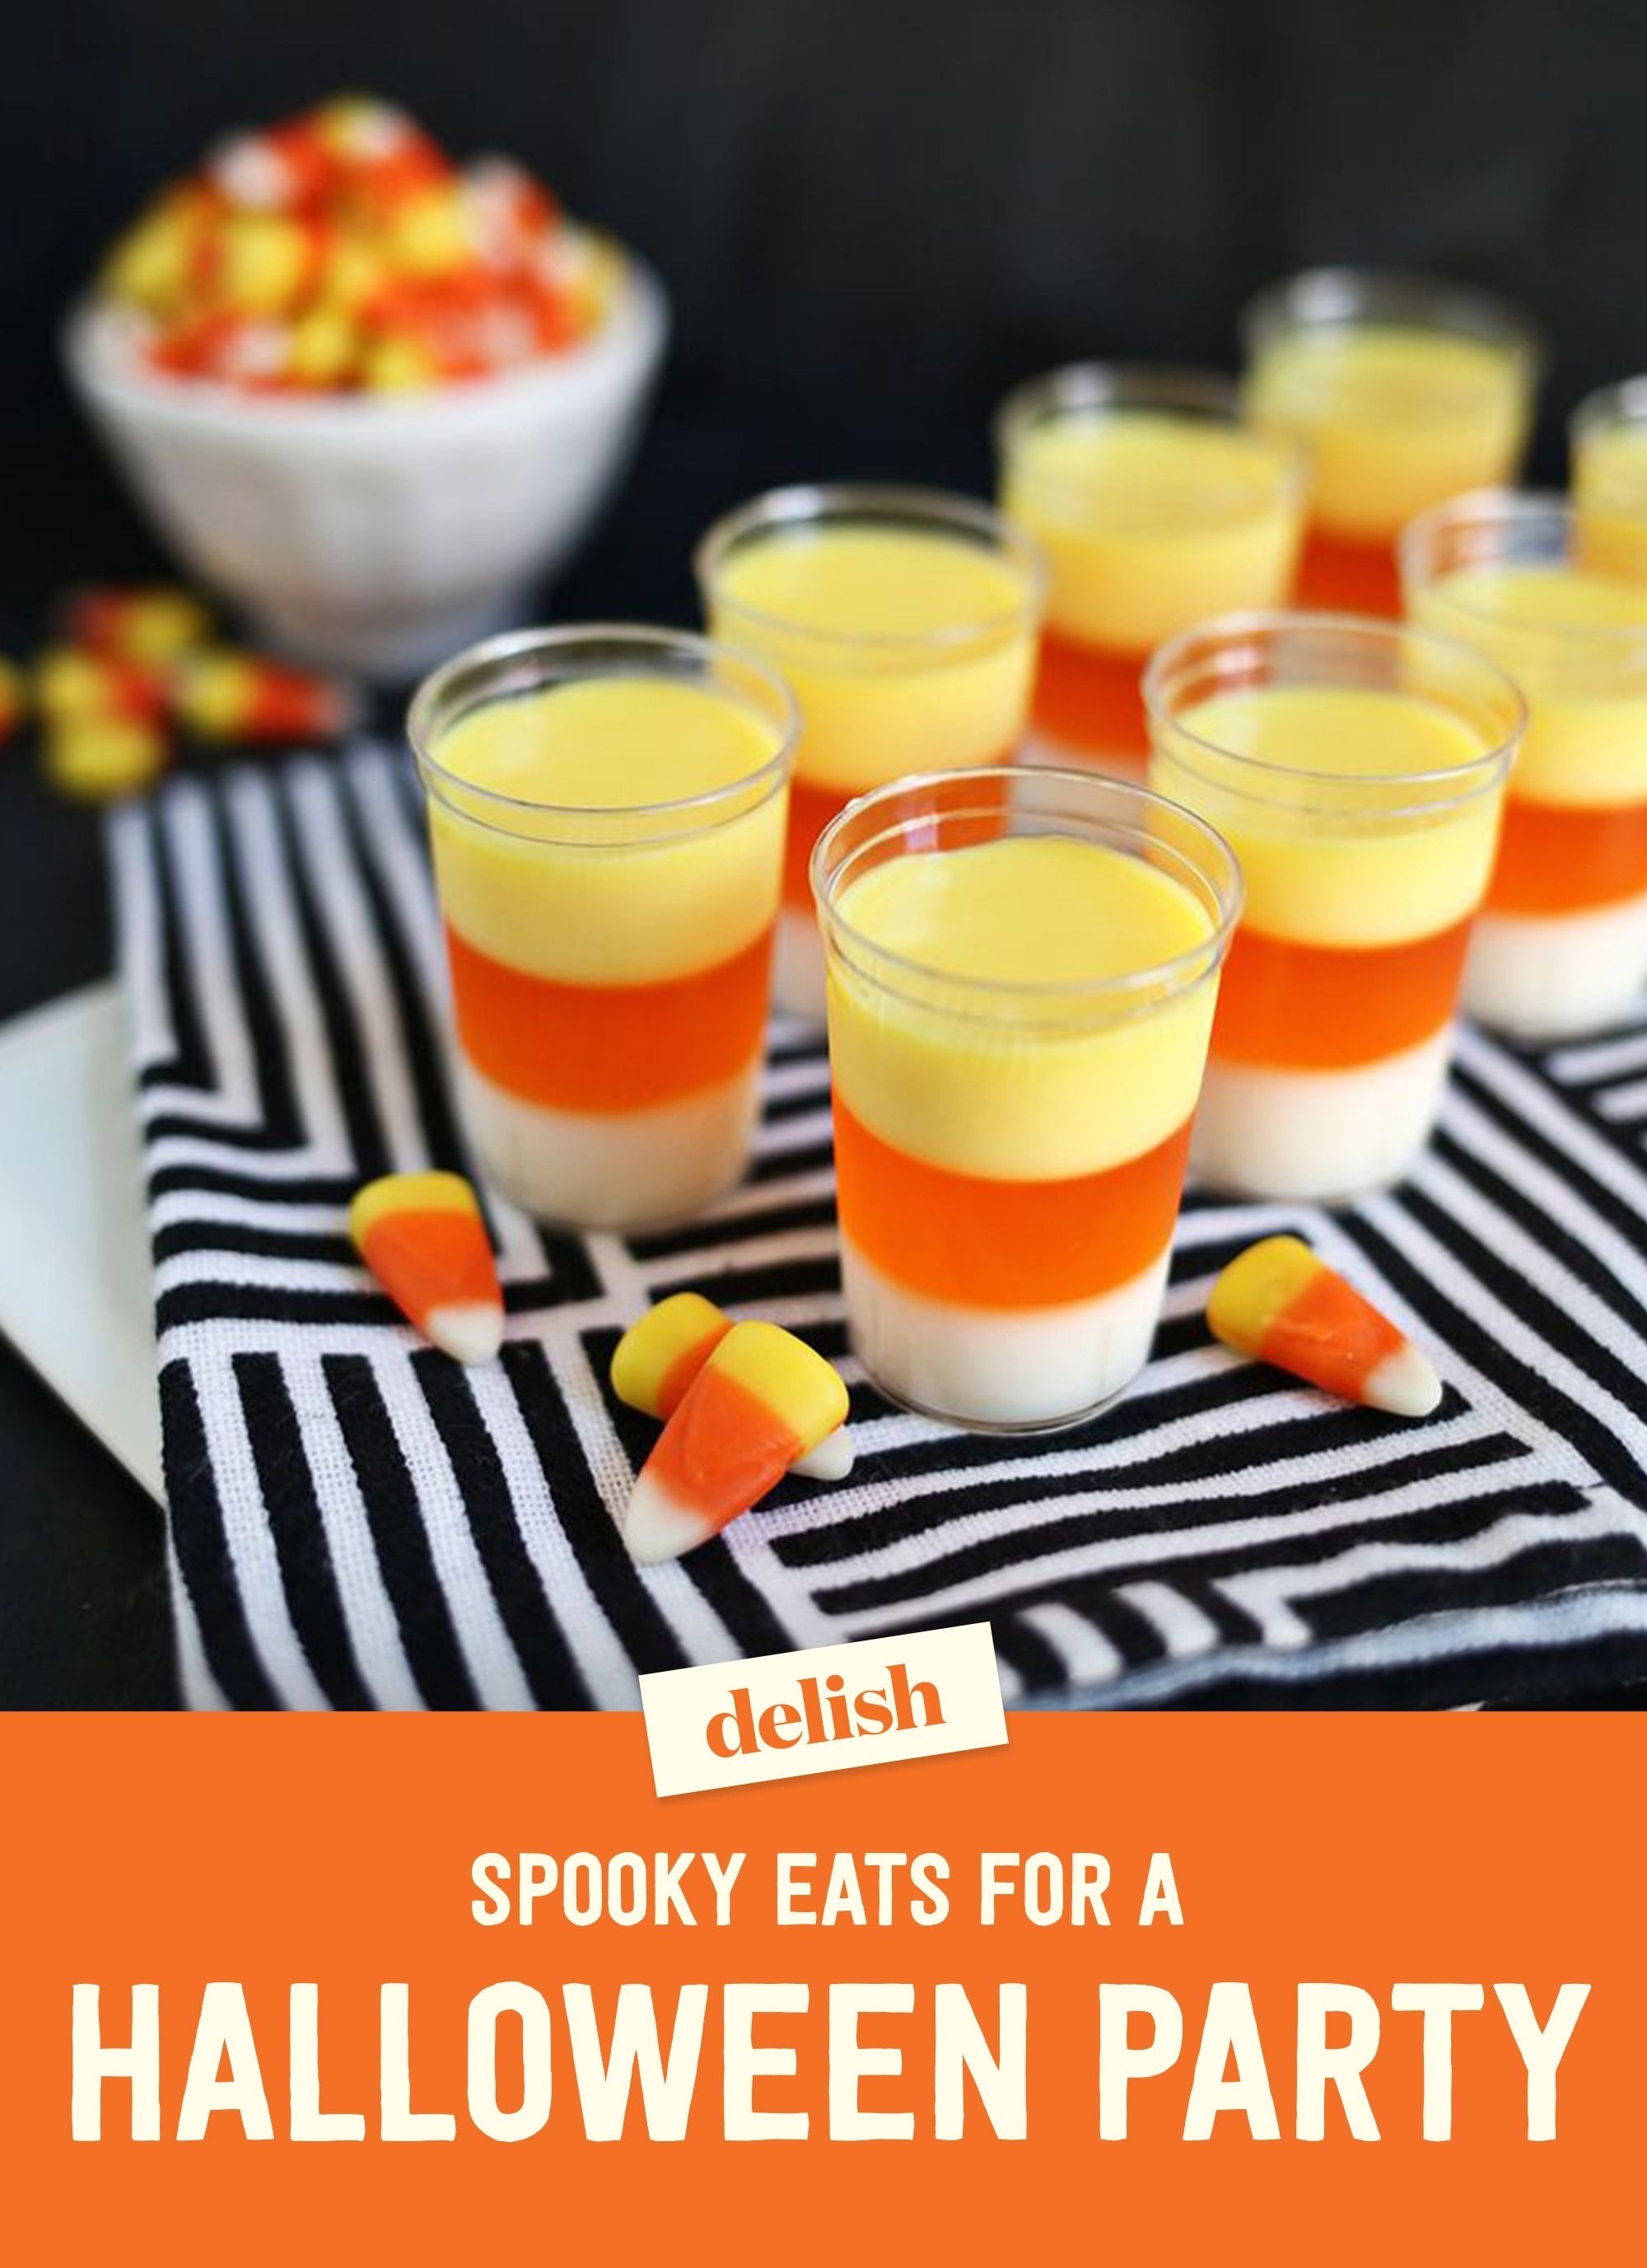 10 Ideal Halloween Food Ideas For Adults 40 adult halloween party ideas halloween food for adults delish 6 2022